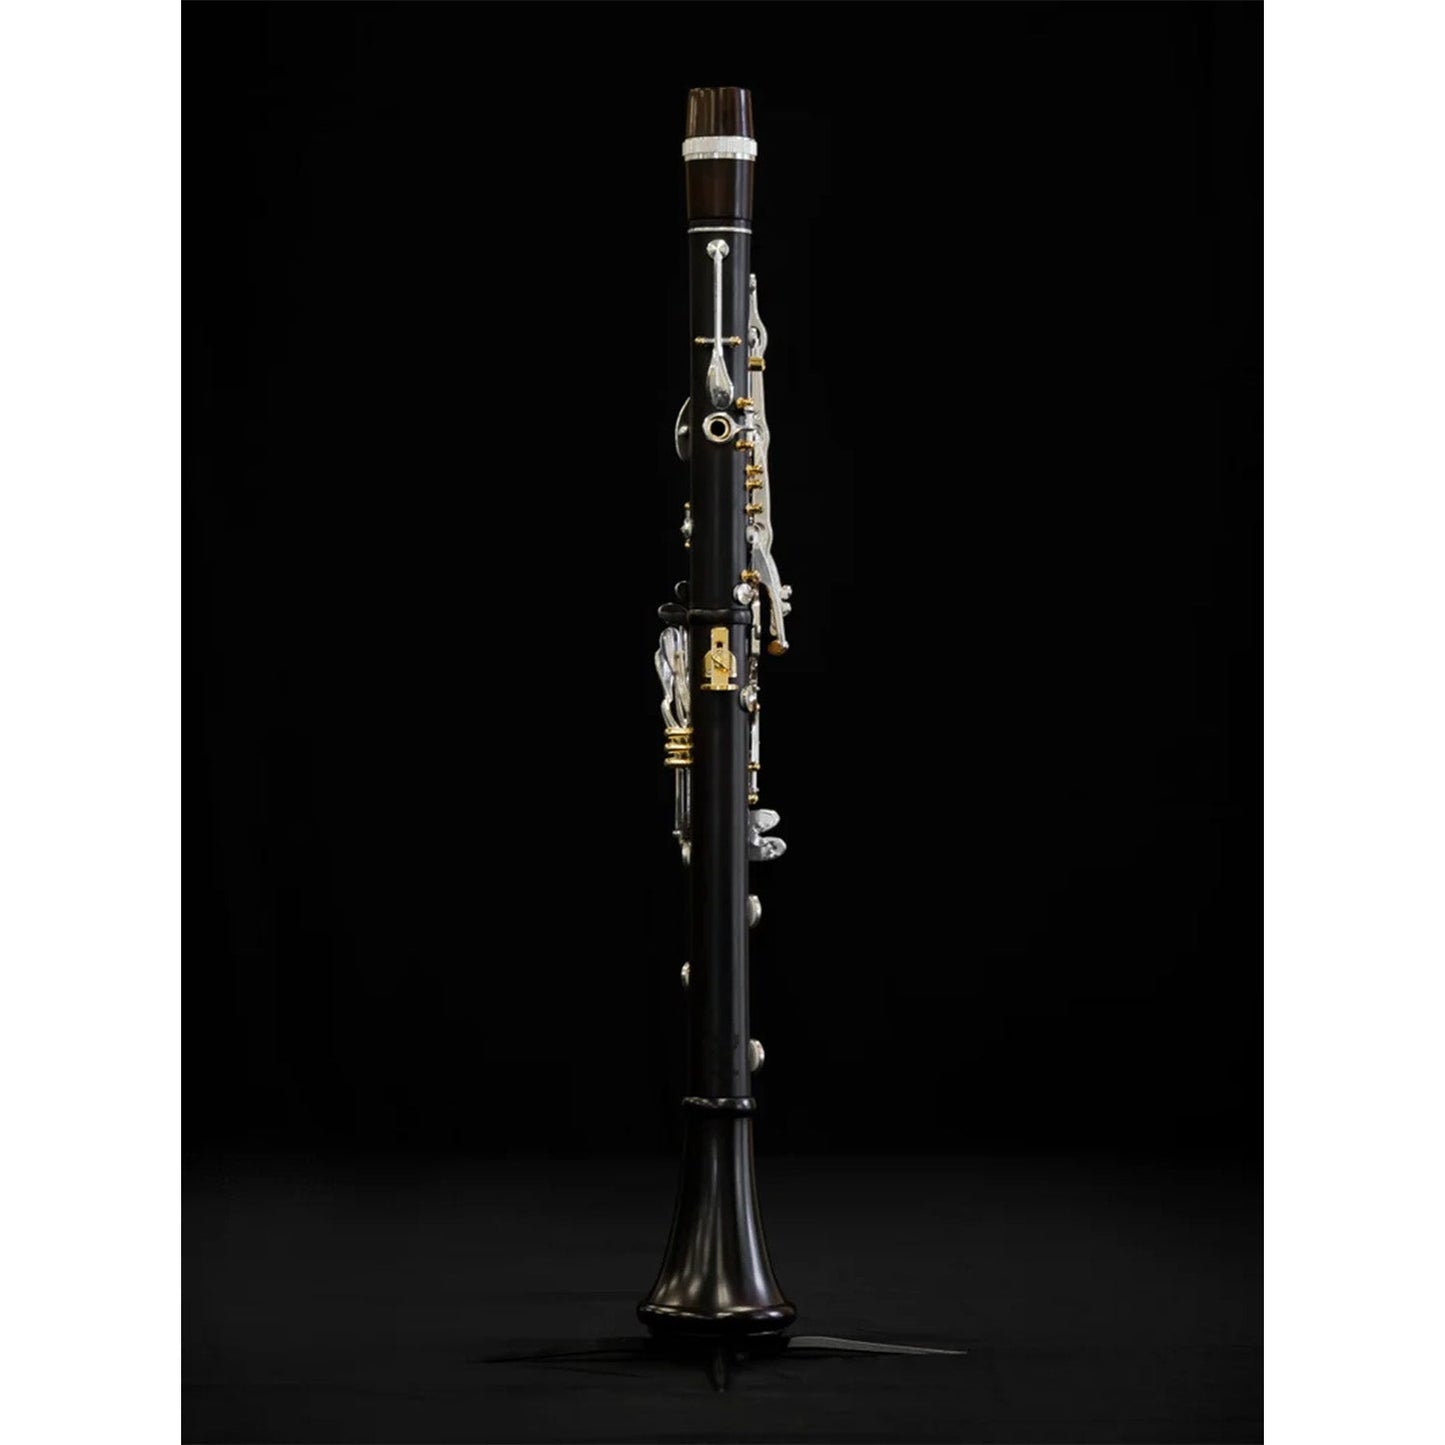 full length rear view shot of clarinet assembled on a stand, against black background